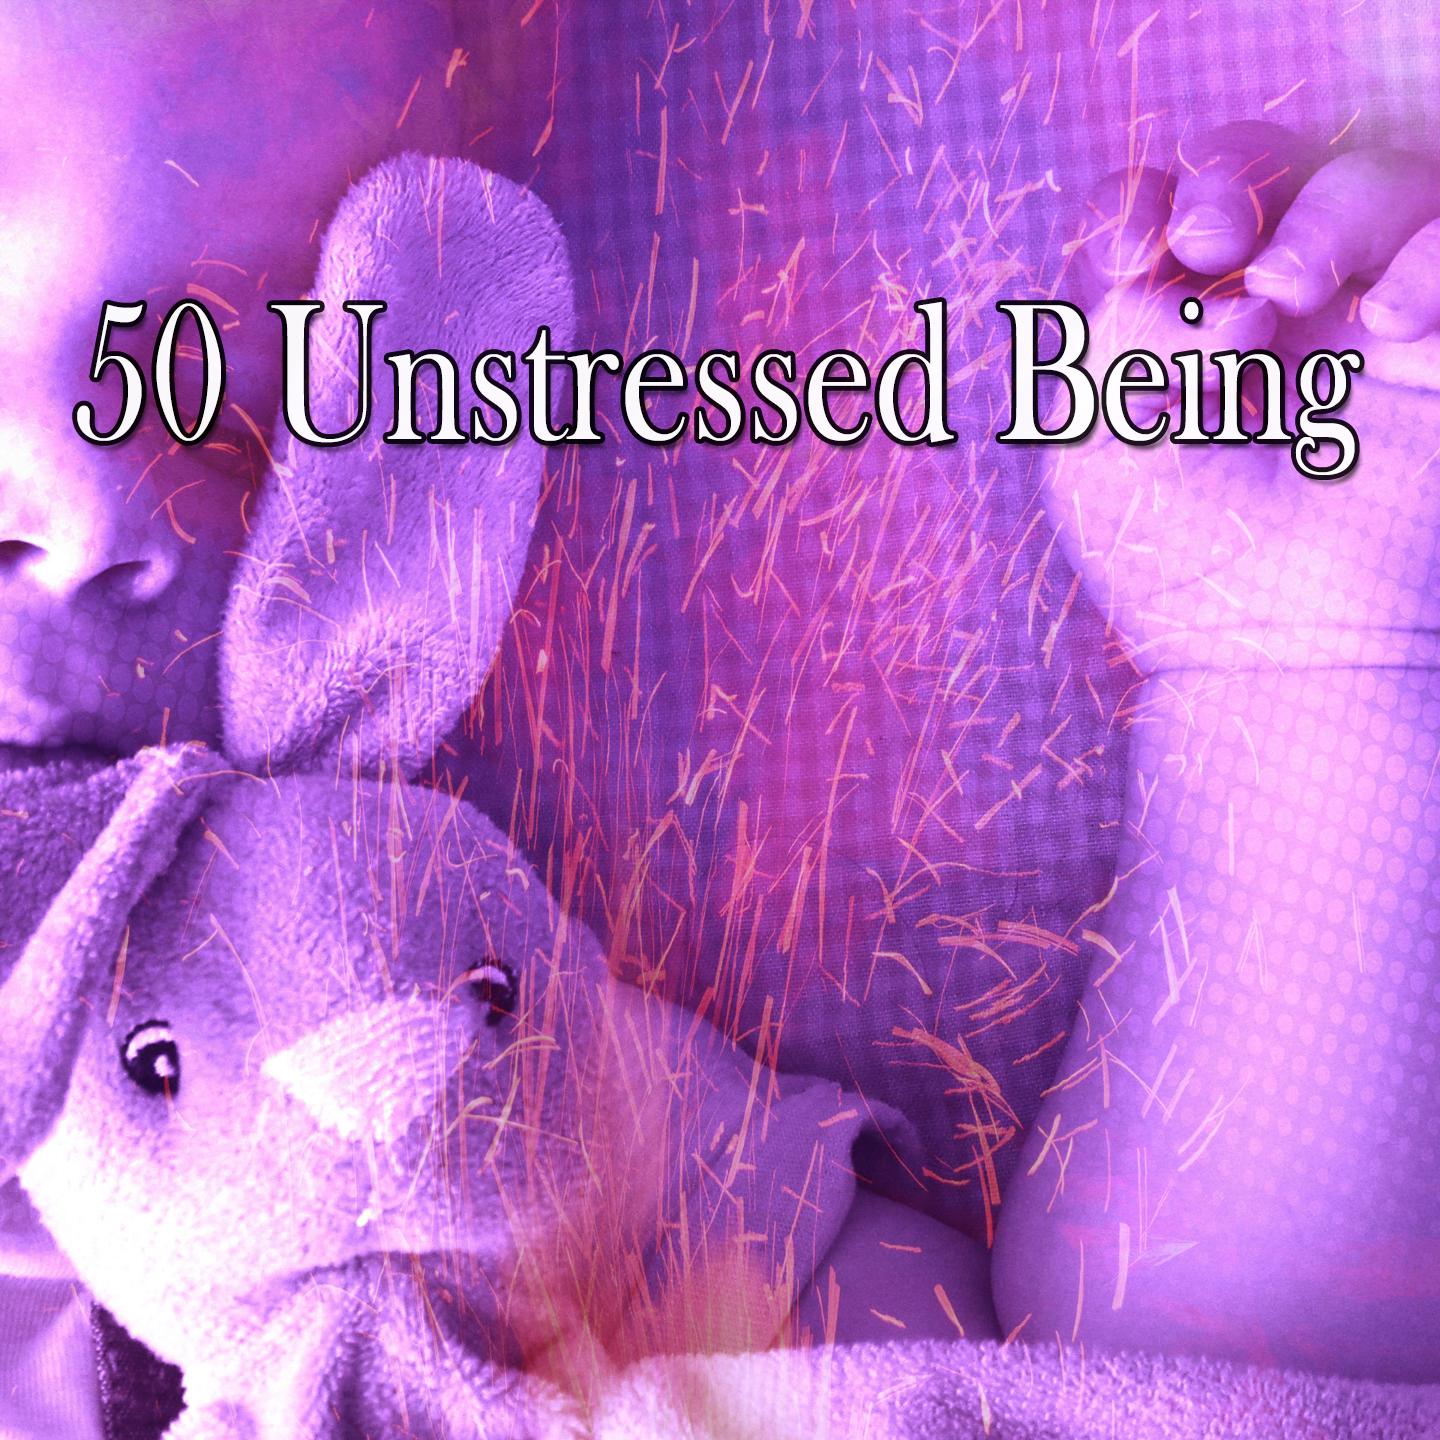 50 Unstressed Being